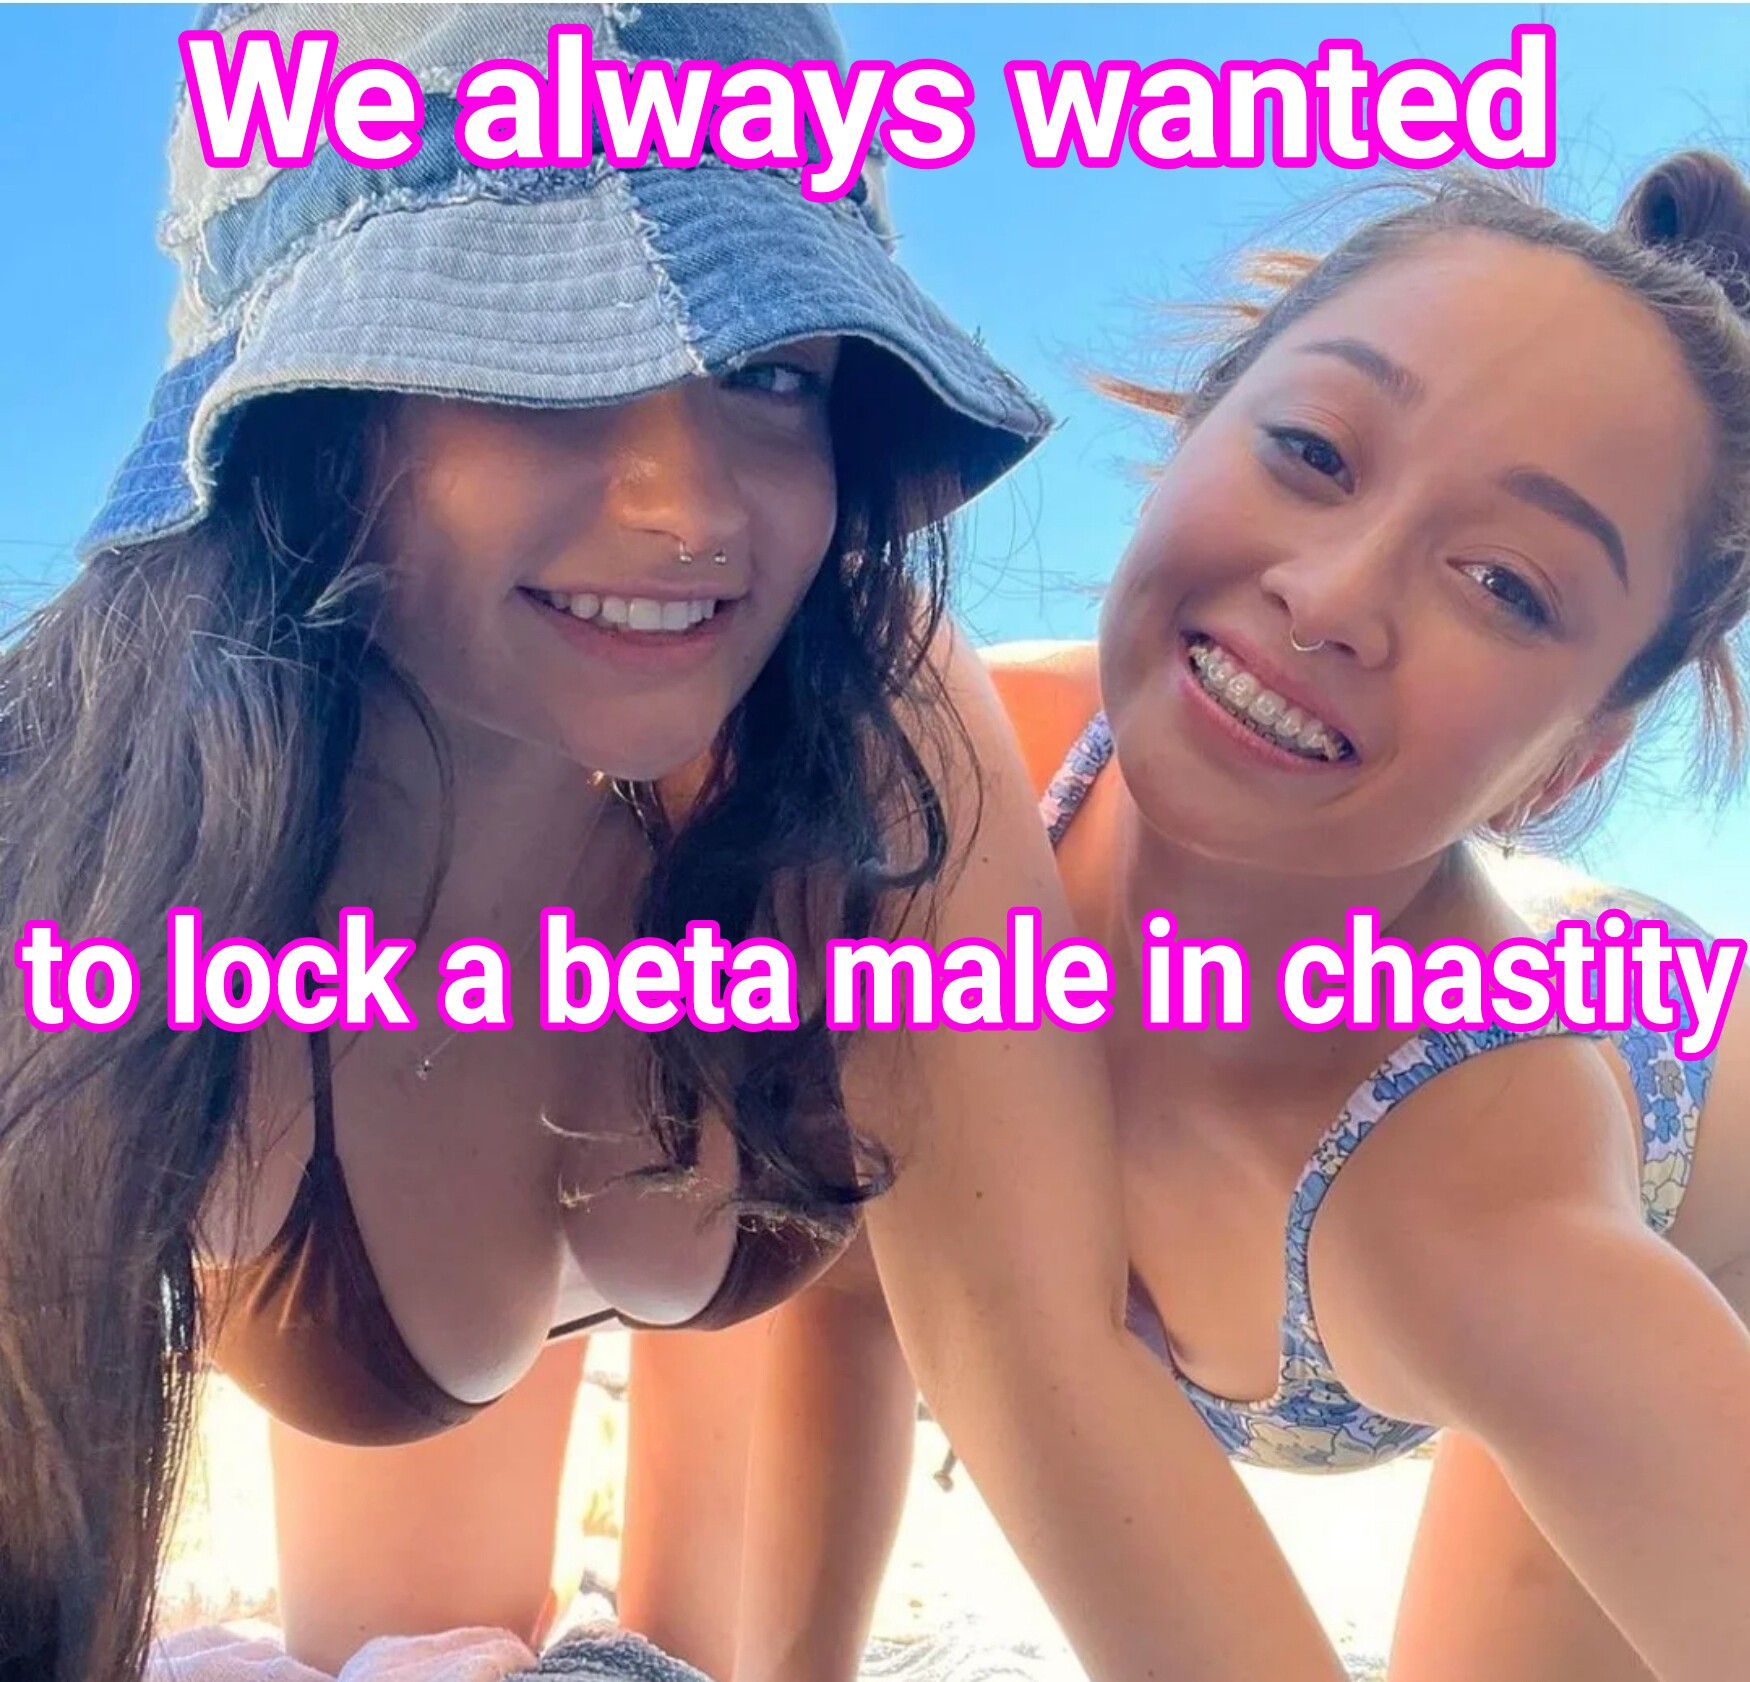 Locking up beta males in chastity